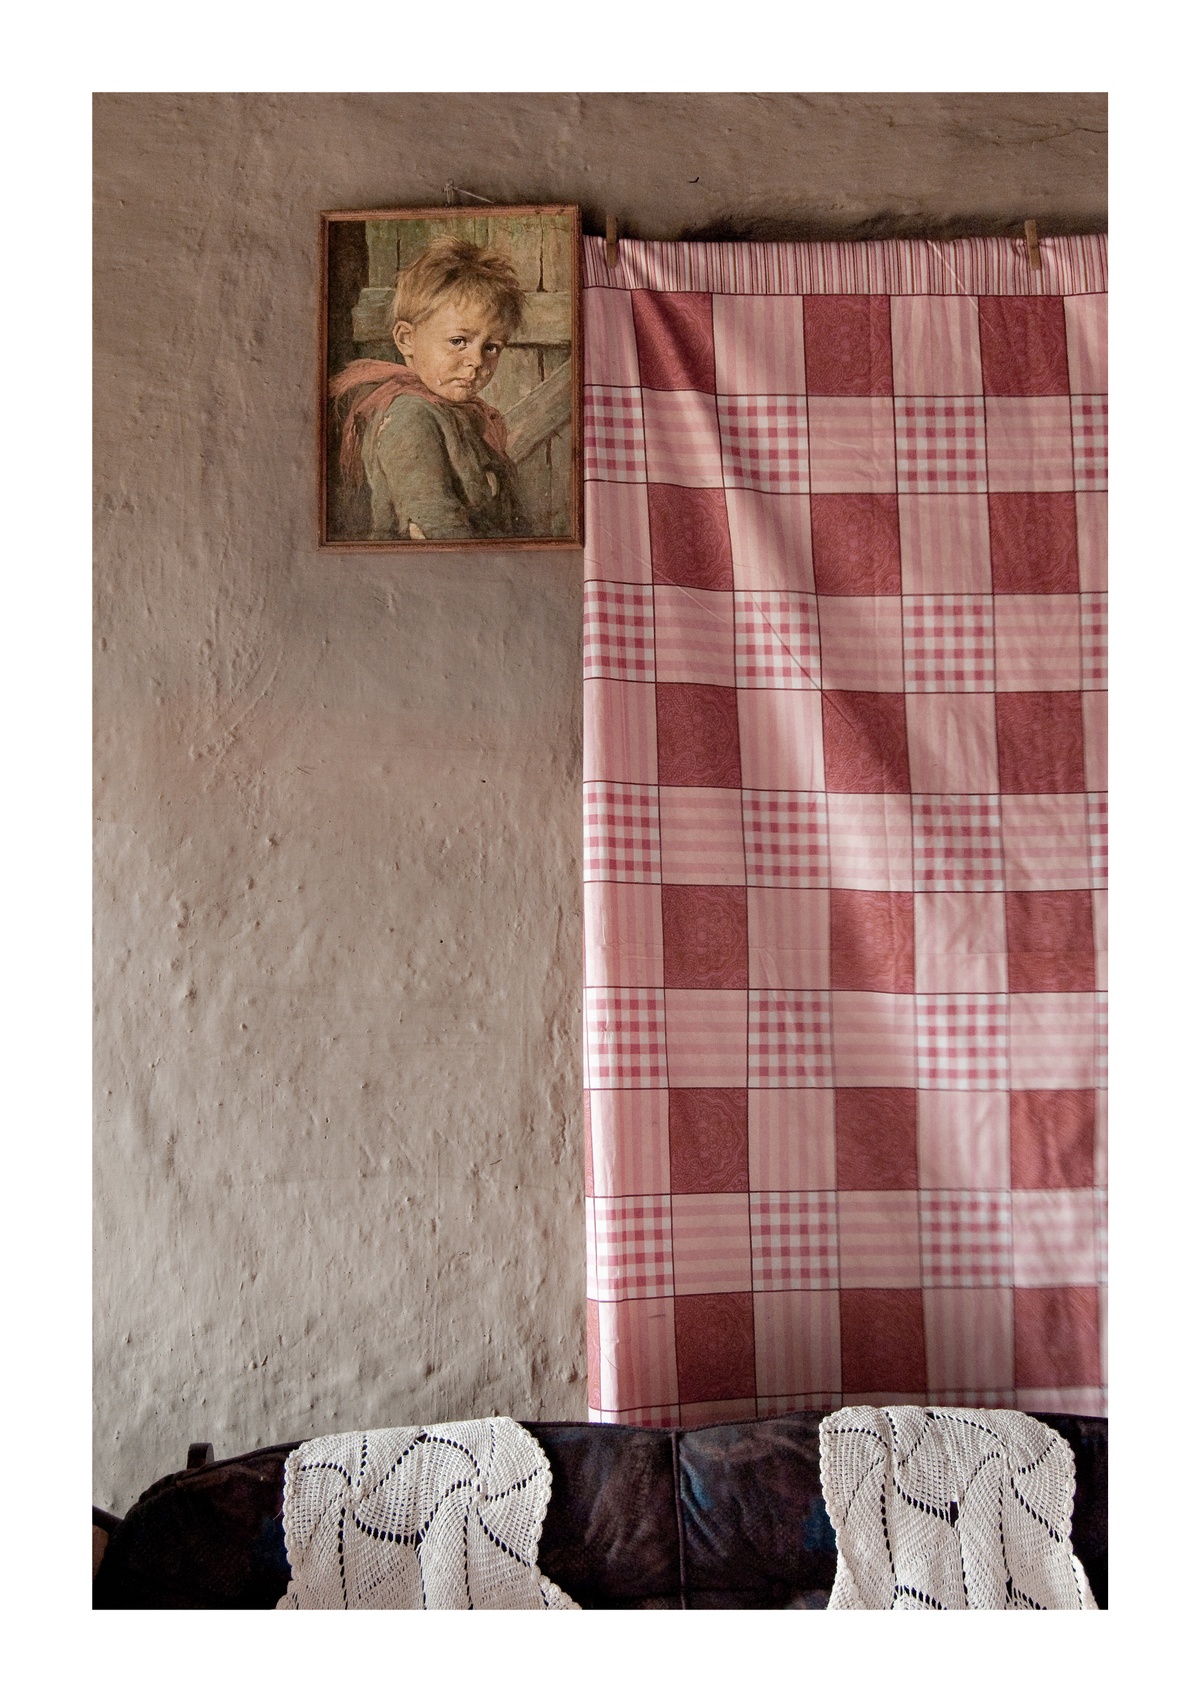 Photograph from Jabulani Dhlamini’s residency on A4’s top floor. On the left, a reproduction of a painting of a child is mounted on the wall. On the right, a curtain covers a window.
